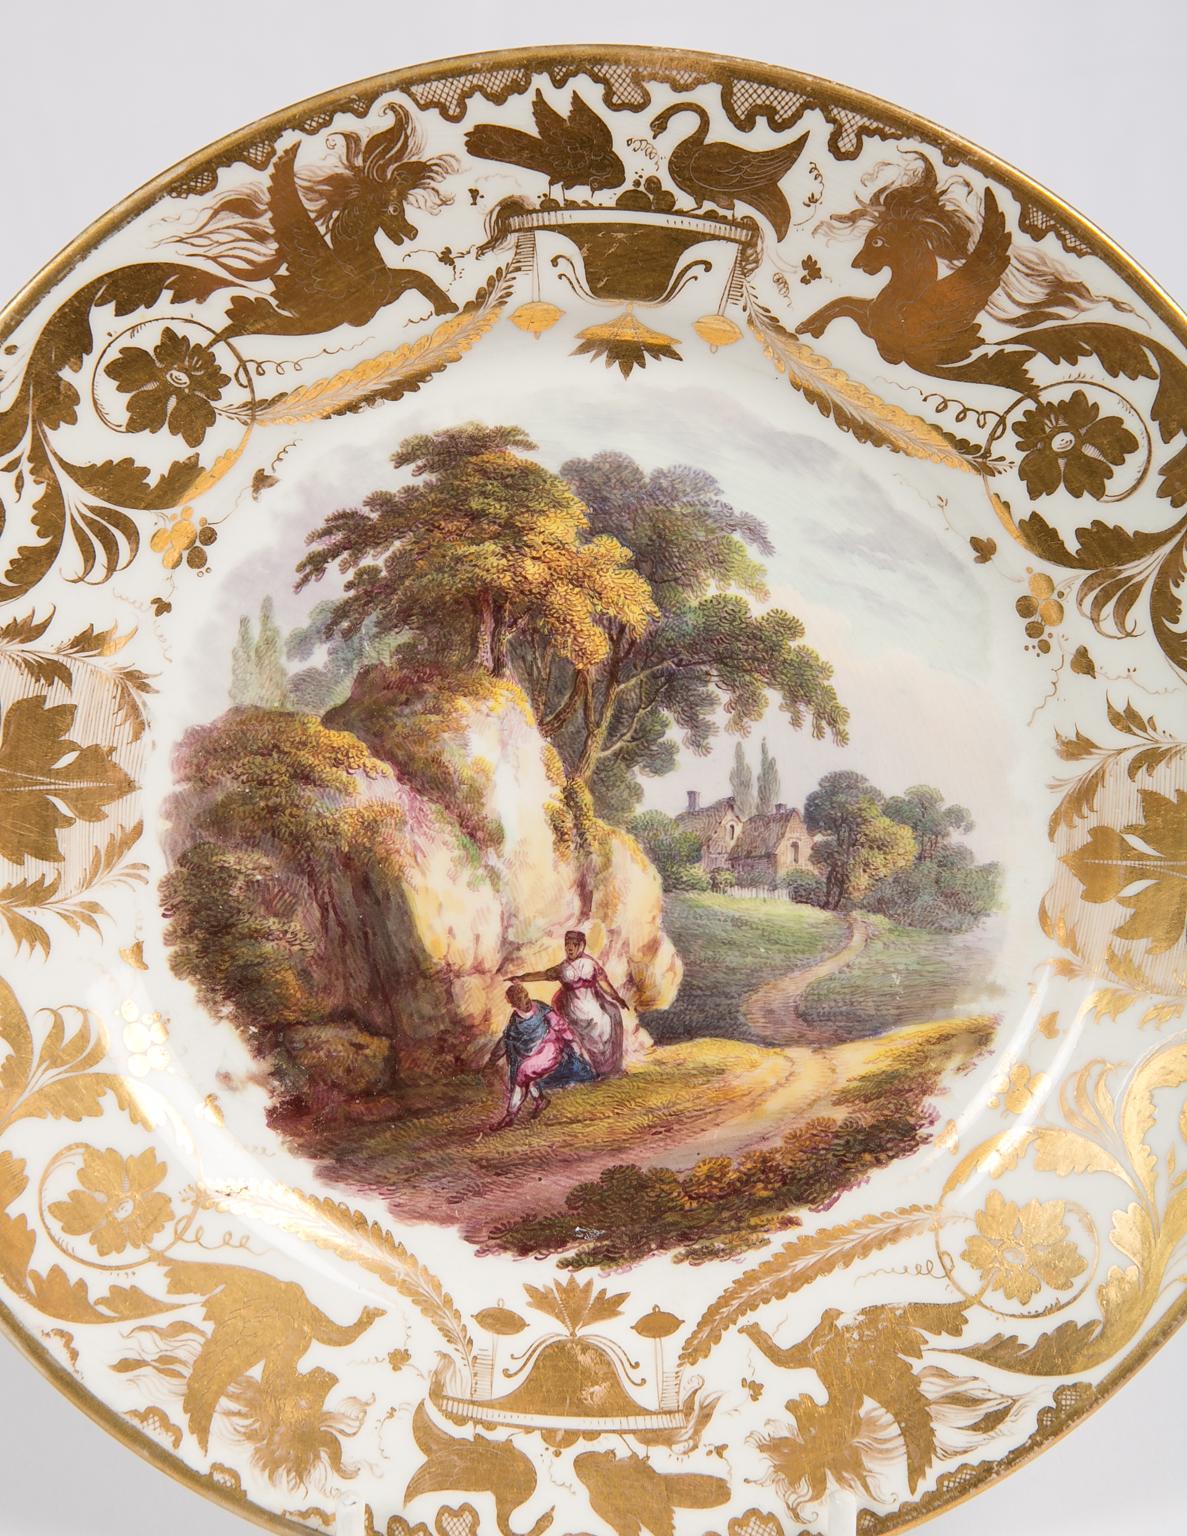 19th Century Antique Porcelain Dishes with Hand-Painted Landscape Scenes